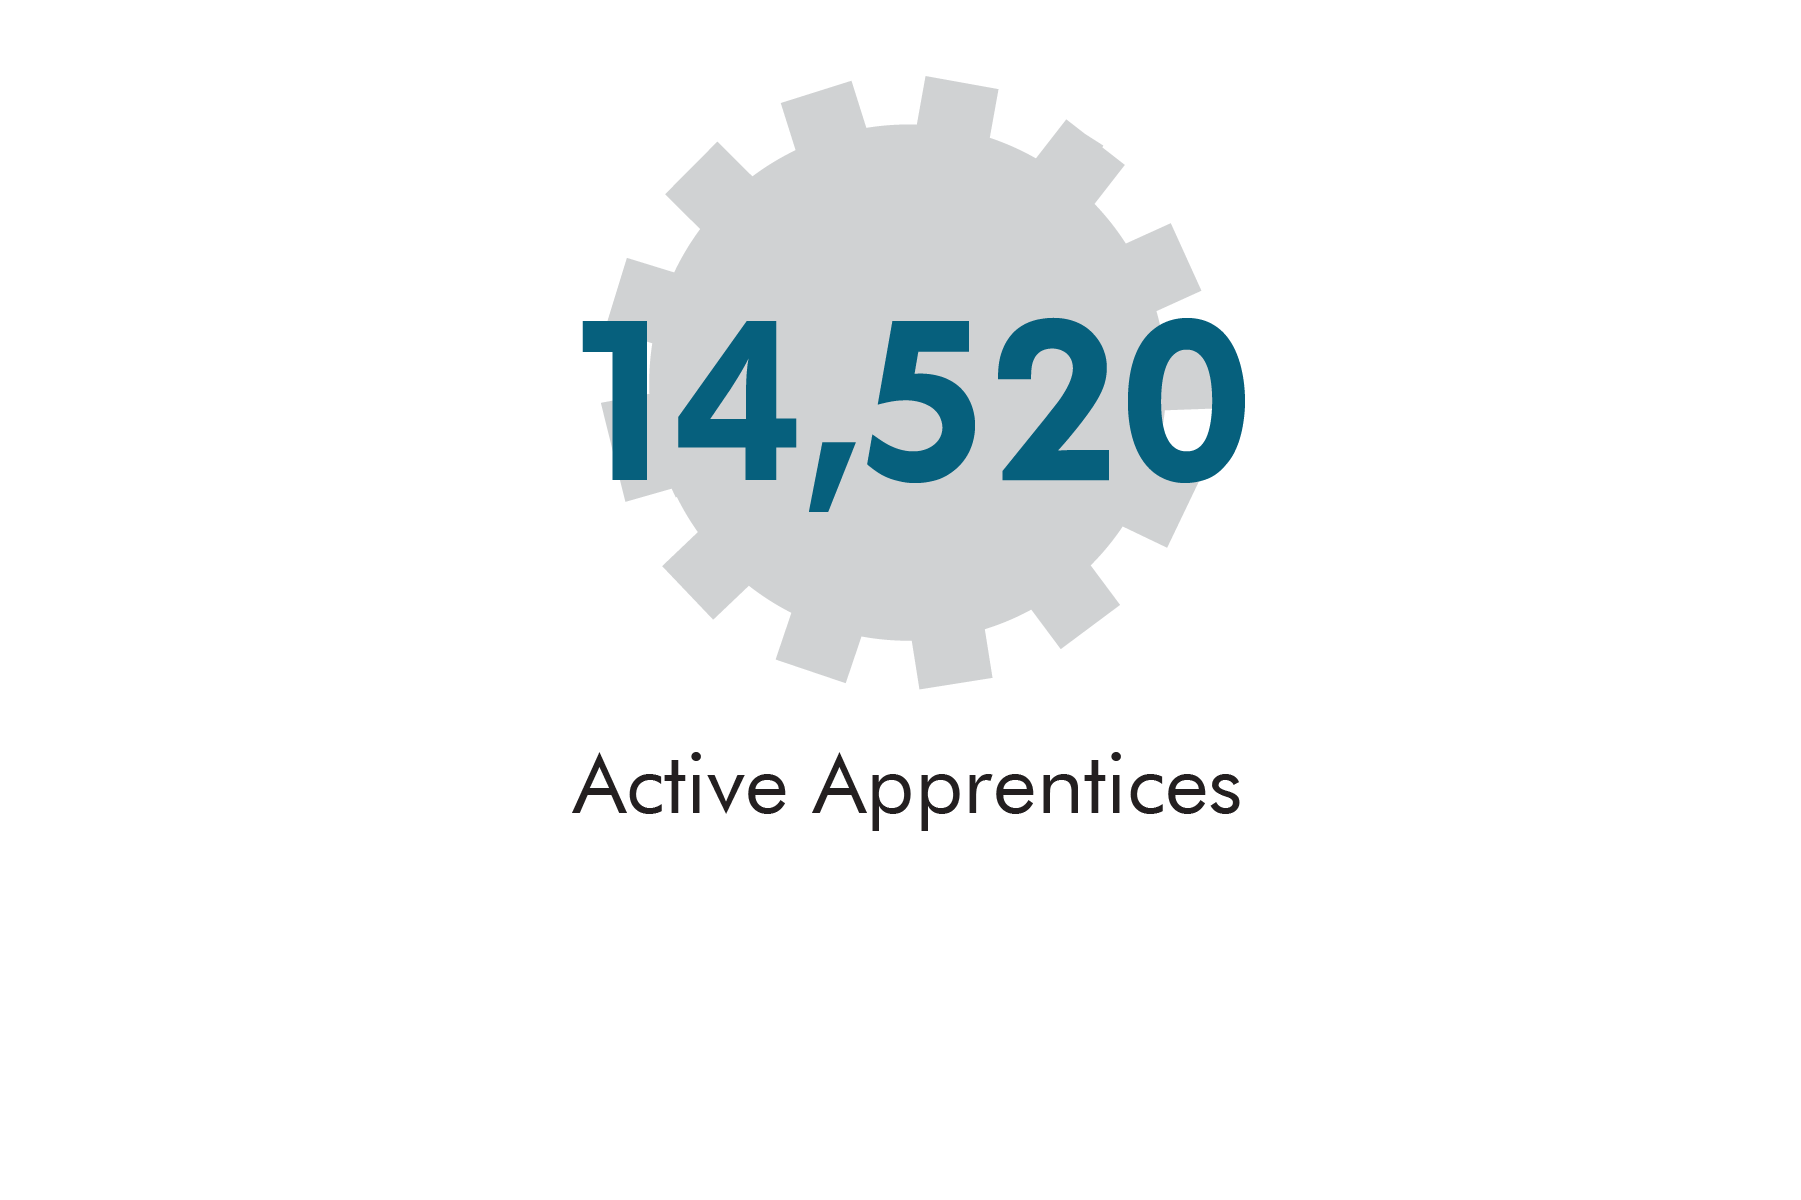 Advanced manufacturing workers across can be found in 29 industries